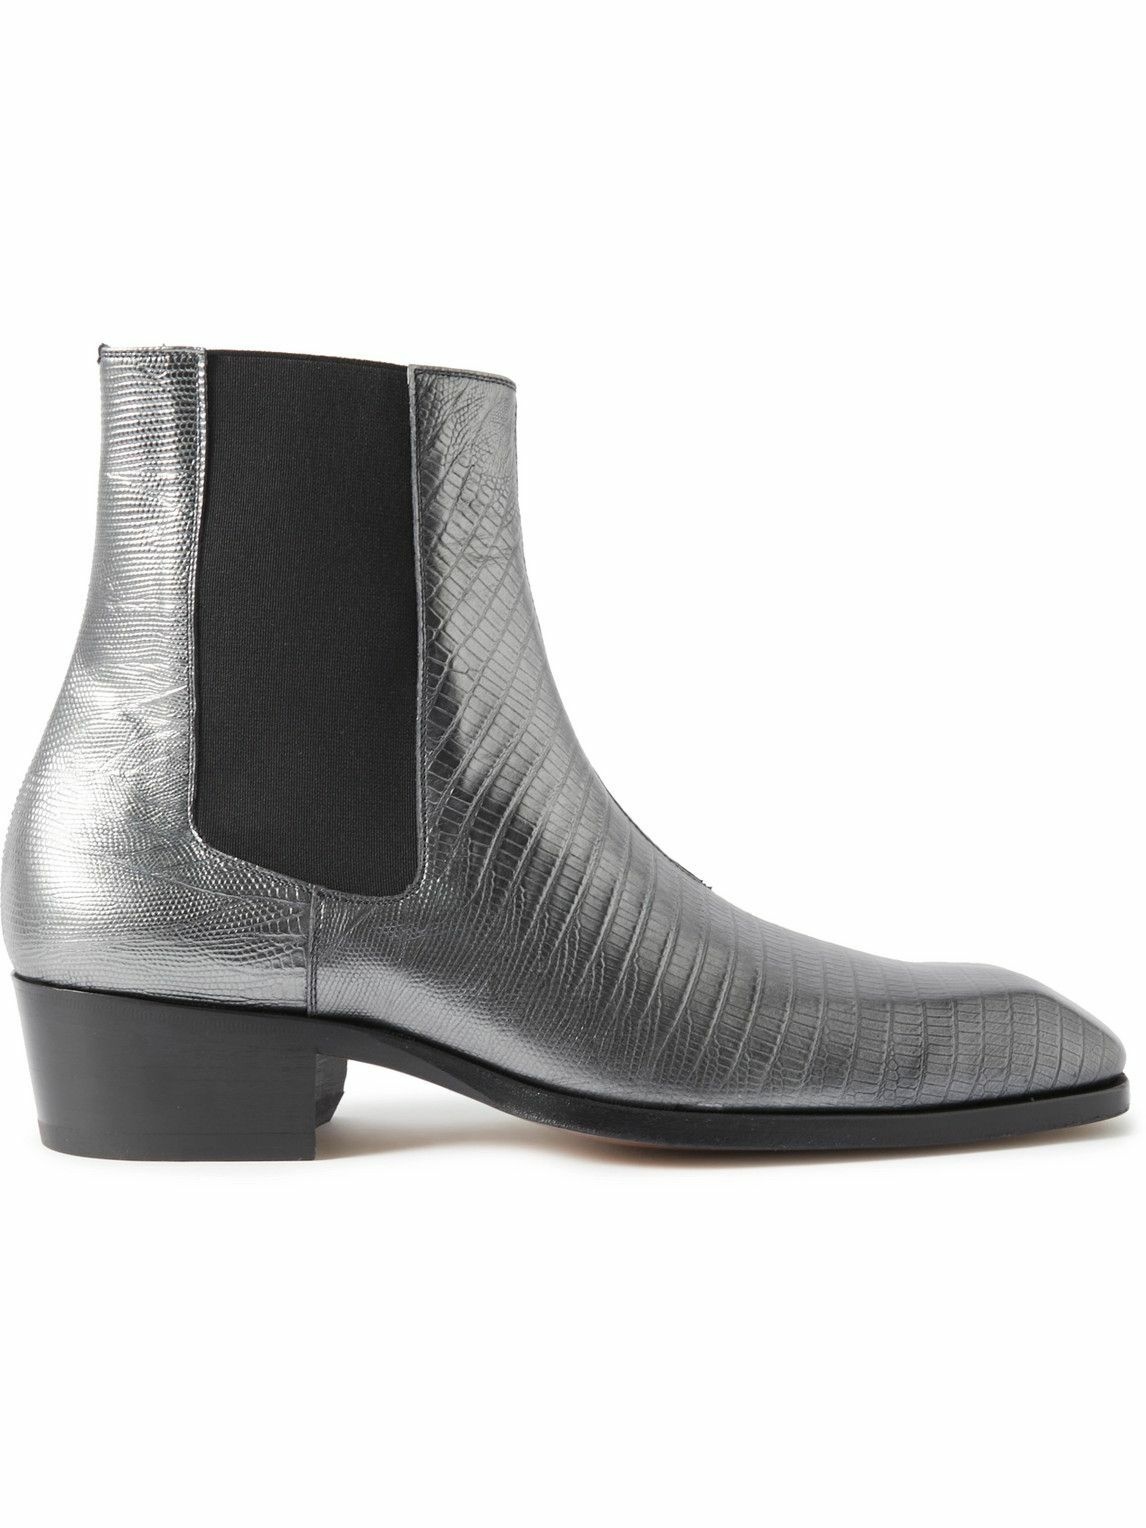 Photo: TOM FORD - Tejus Bailey Metallic Lizard-Effect Leather Chelsea Boots - Silver